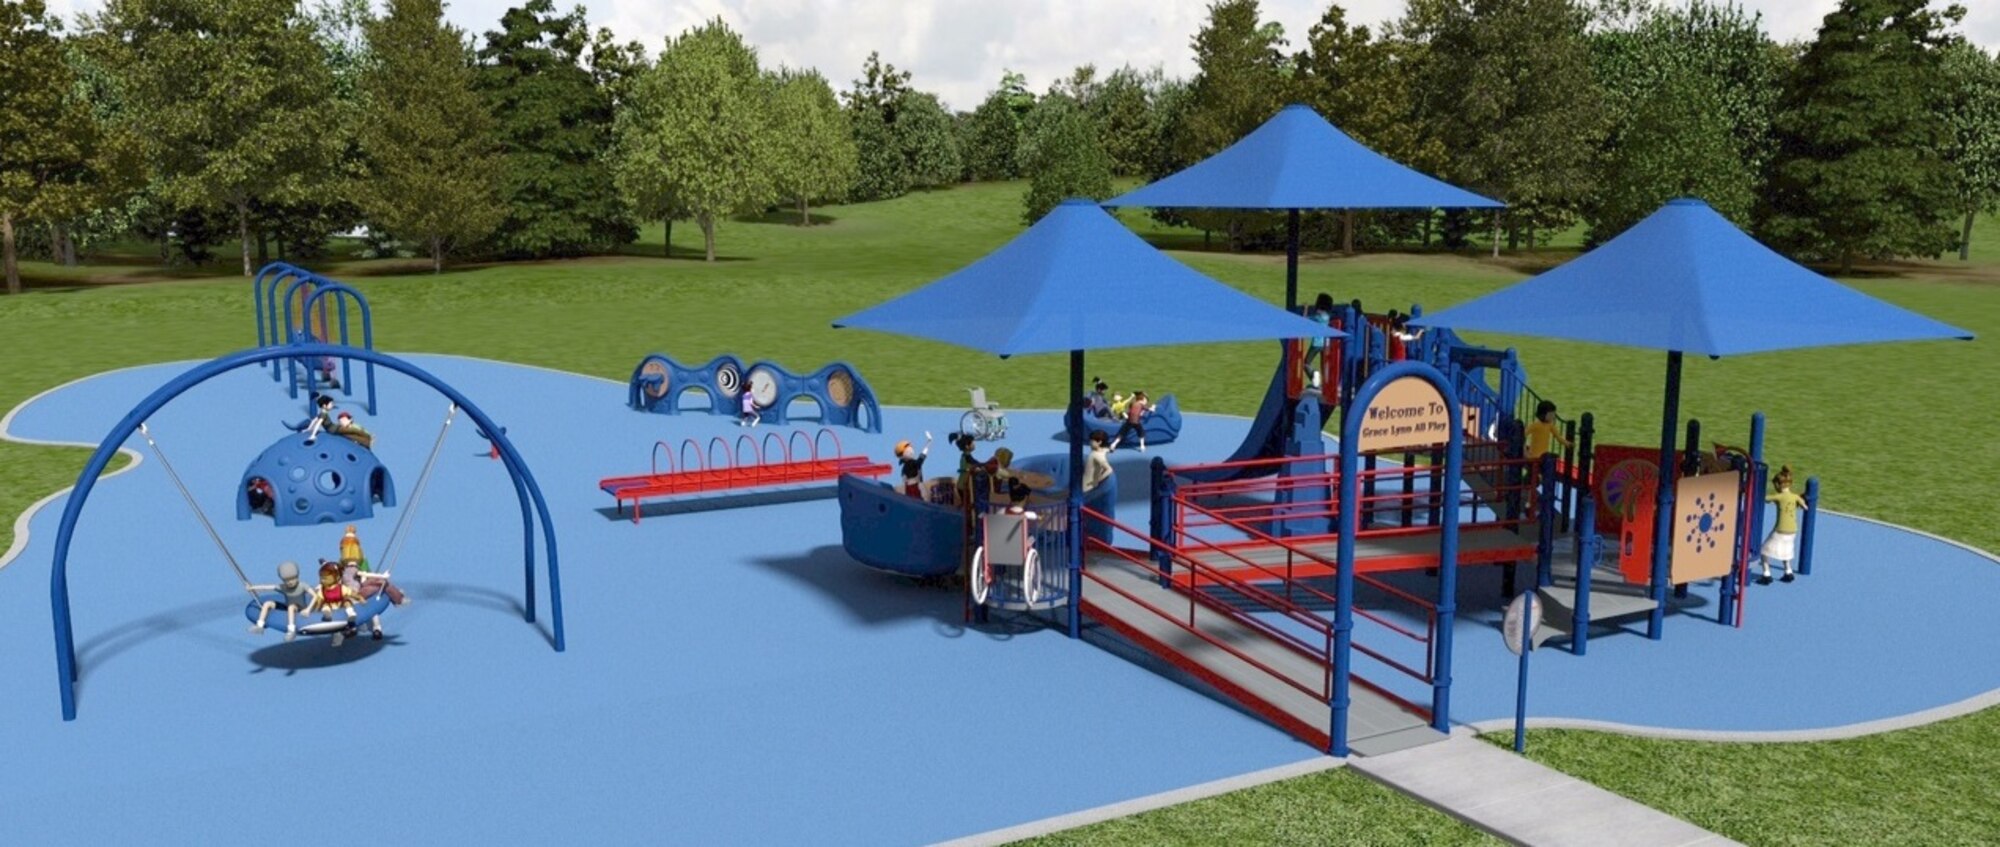 Wright-Patt community volunteers will use the above plan to build the inclusive playground, which will allow disabled and able-bodied children to play together. (Contributed graphic)